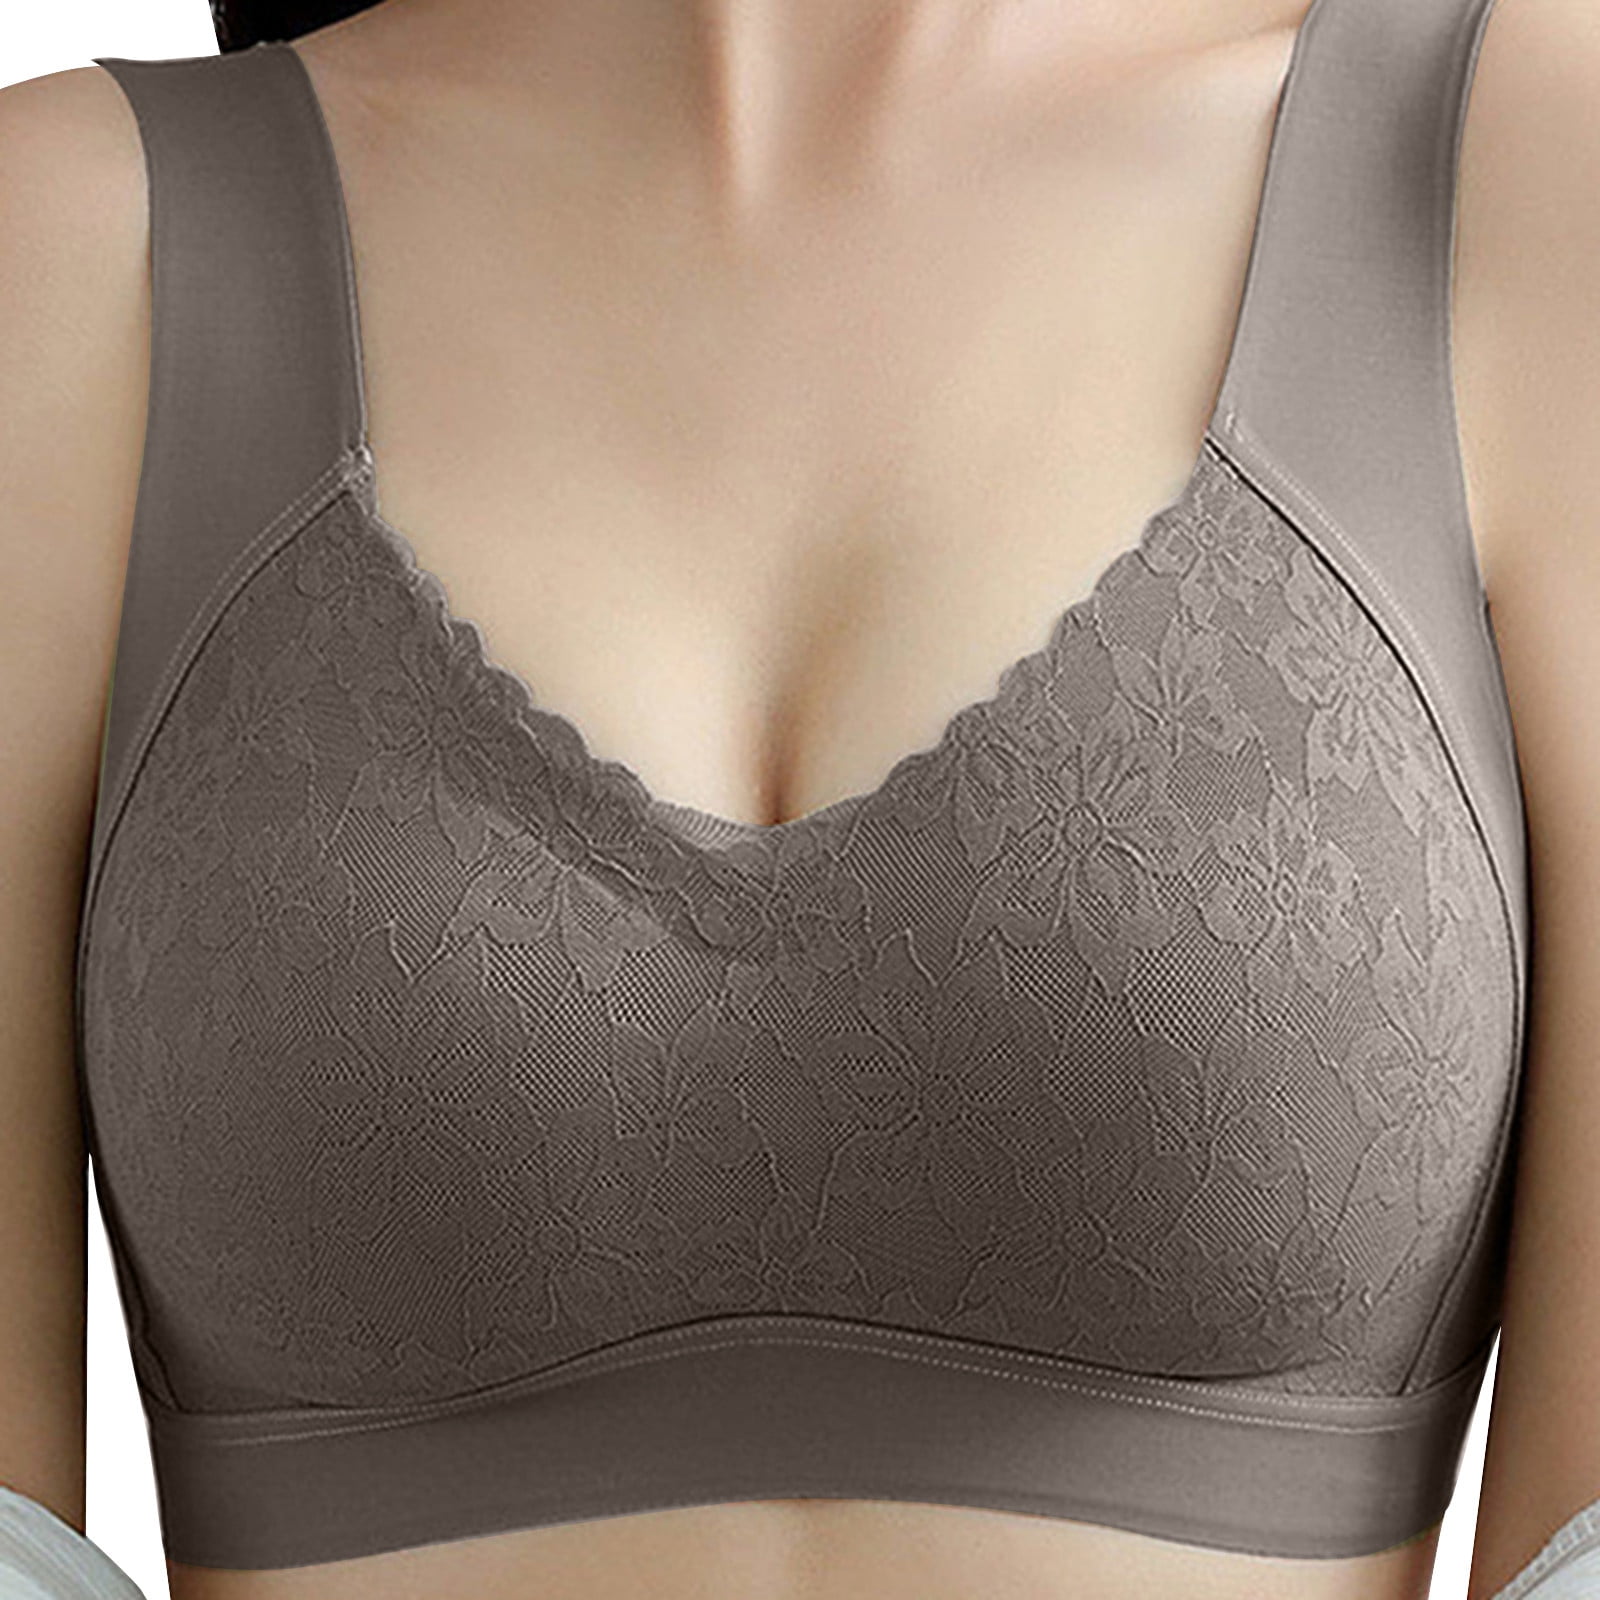 CAICJ98 Bras For Women Women's Plus Size Full Coverage Non Padded Wireless  Minimizer Bra -Comfort and Double Support C,XXL 